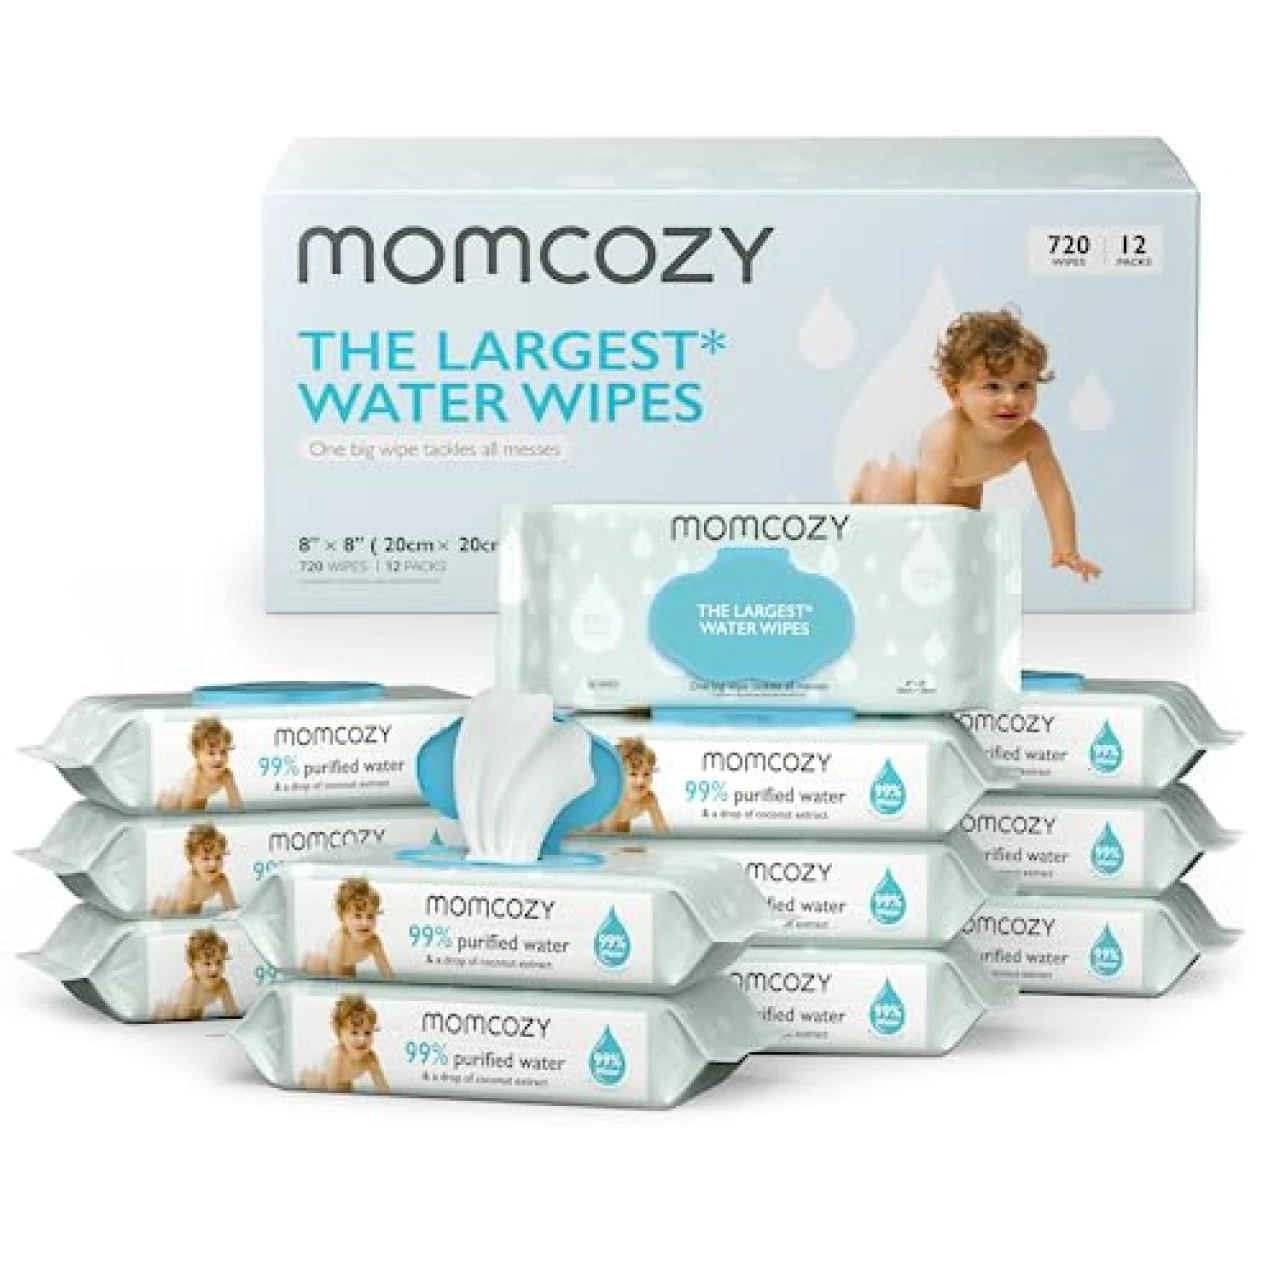 Baby Wipes, Momcozy Sensitive Water Wipes-Extra Large Size Design, One Top Two, 99% Purified Water, Unscented &amp; Hypoallergenic, Friendly to Sensitive Skin, 12 Flip-Top Packs (720 Wipes Total)